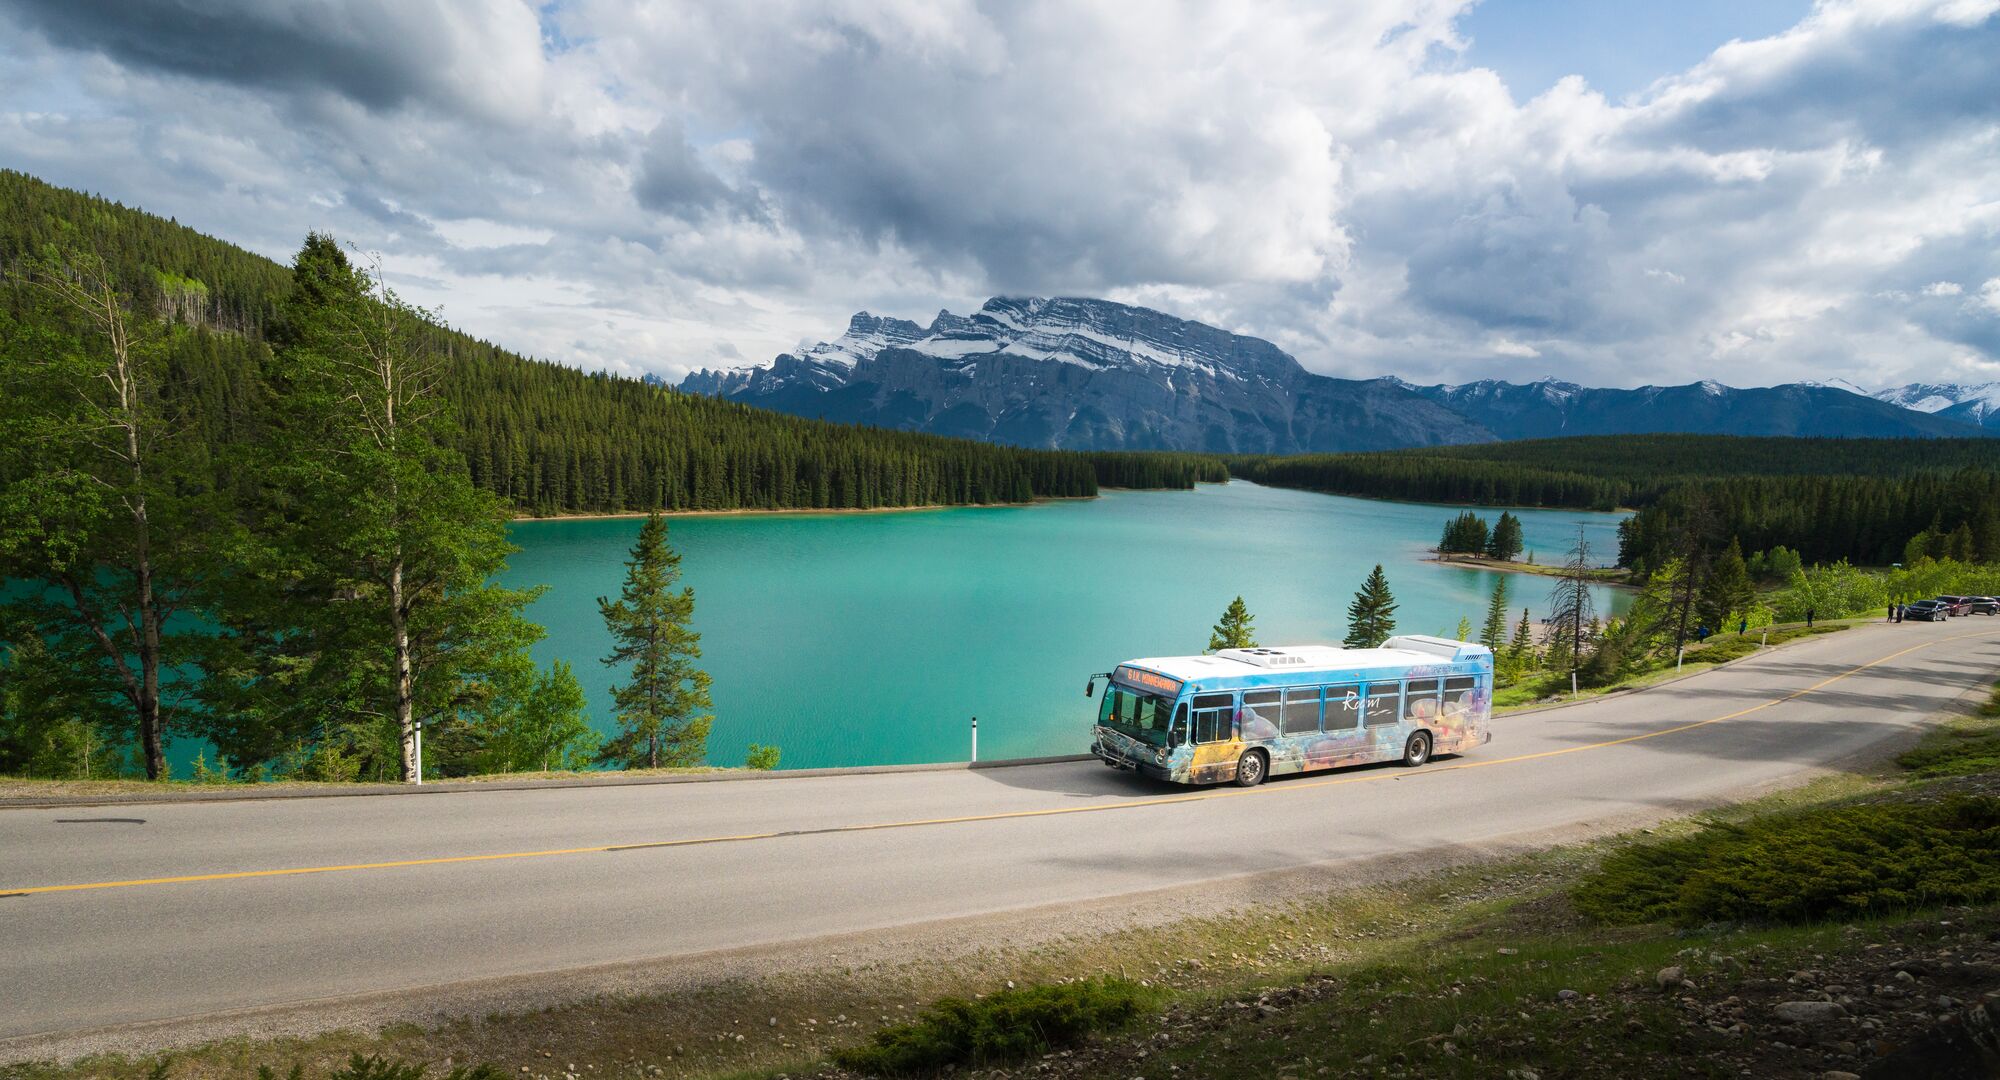 The perfect captured of a Roam Transit shuttle passing the Two Jack Lake.